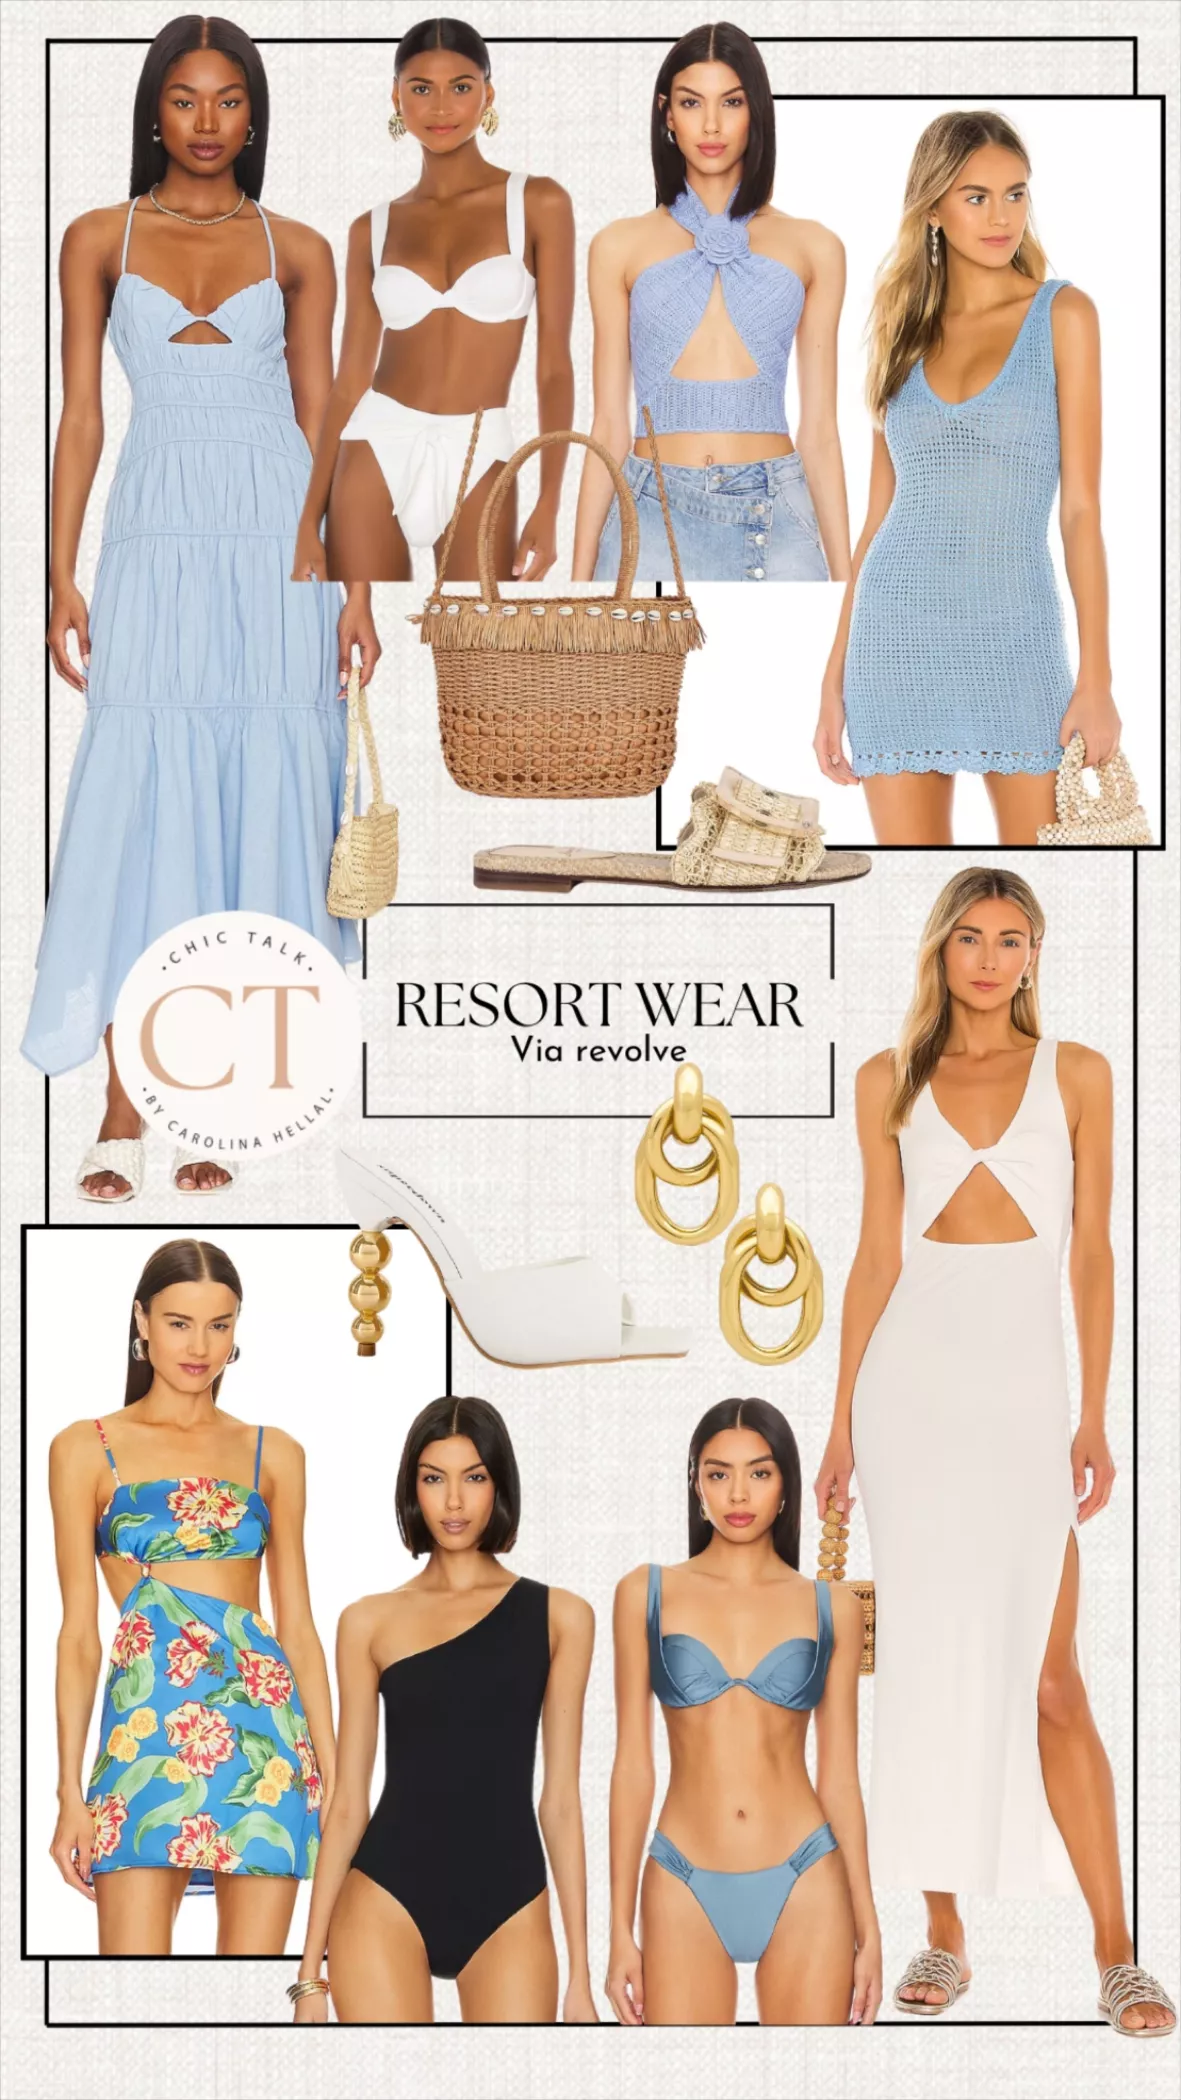 New Resort Wear Finds for Your Next Vacation